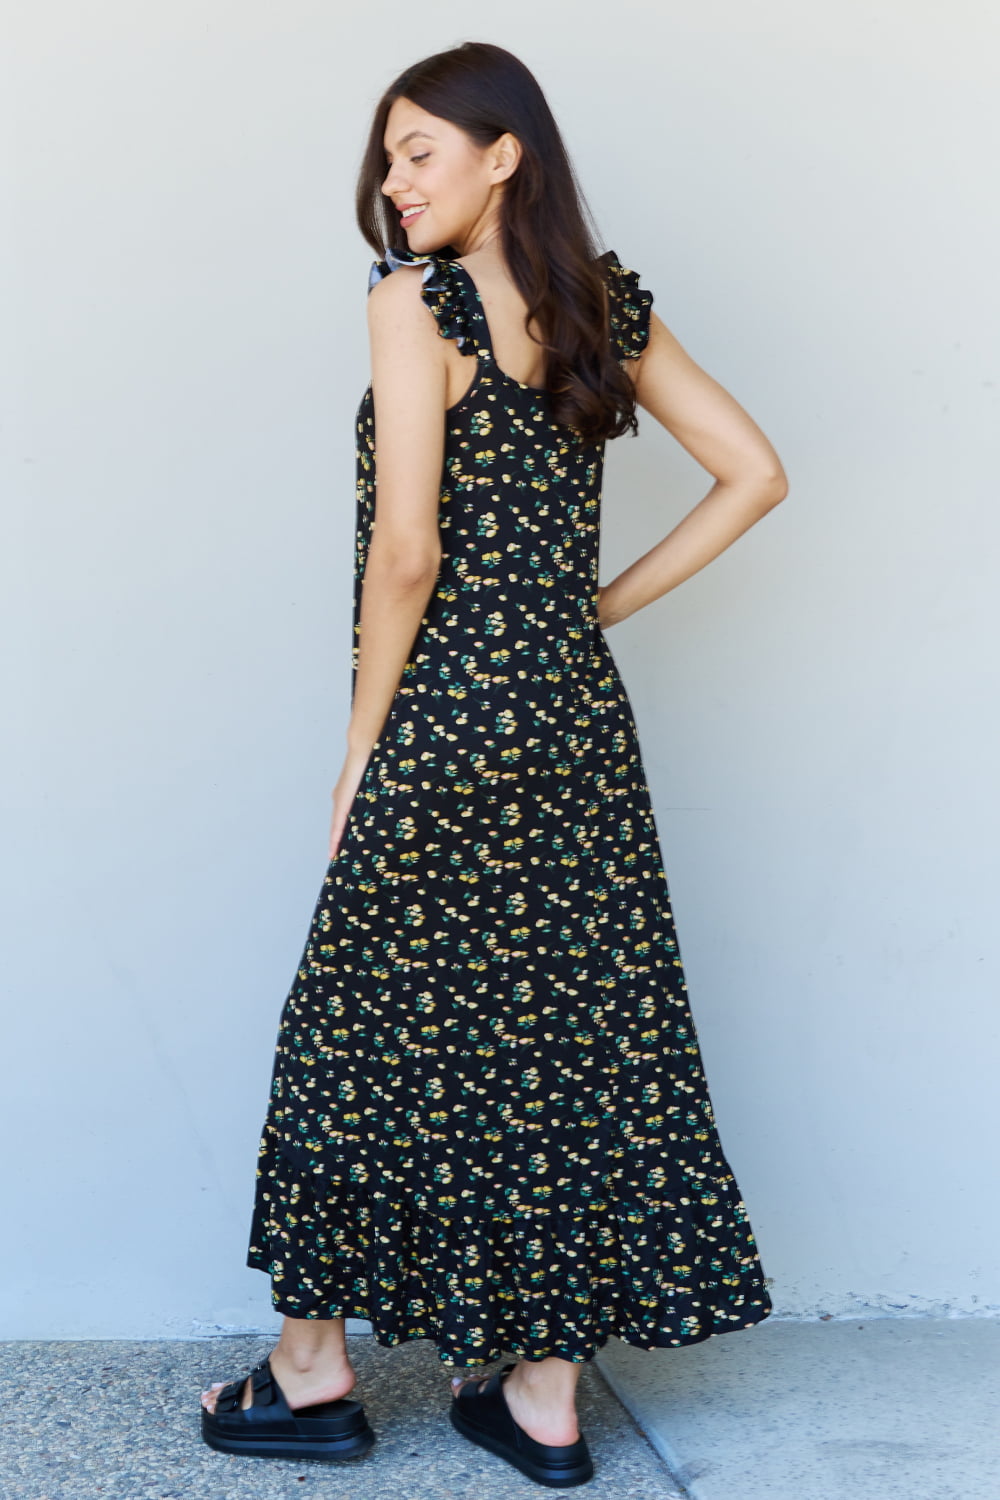 Doublju In The Garden Ruffle Floral Maxi Dress in  Black Yellow Floral